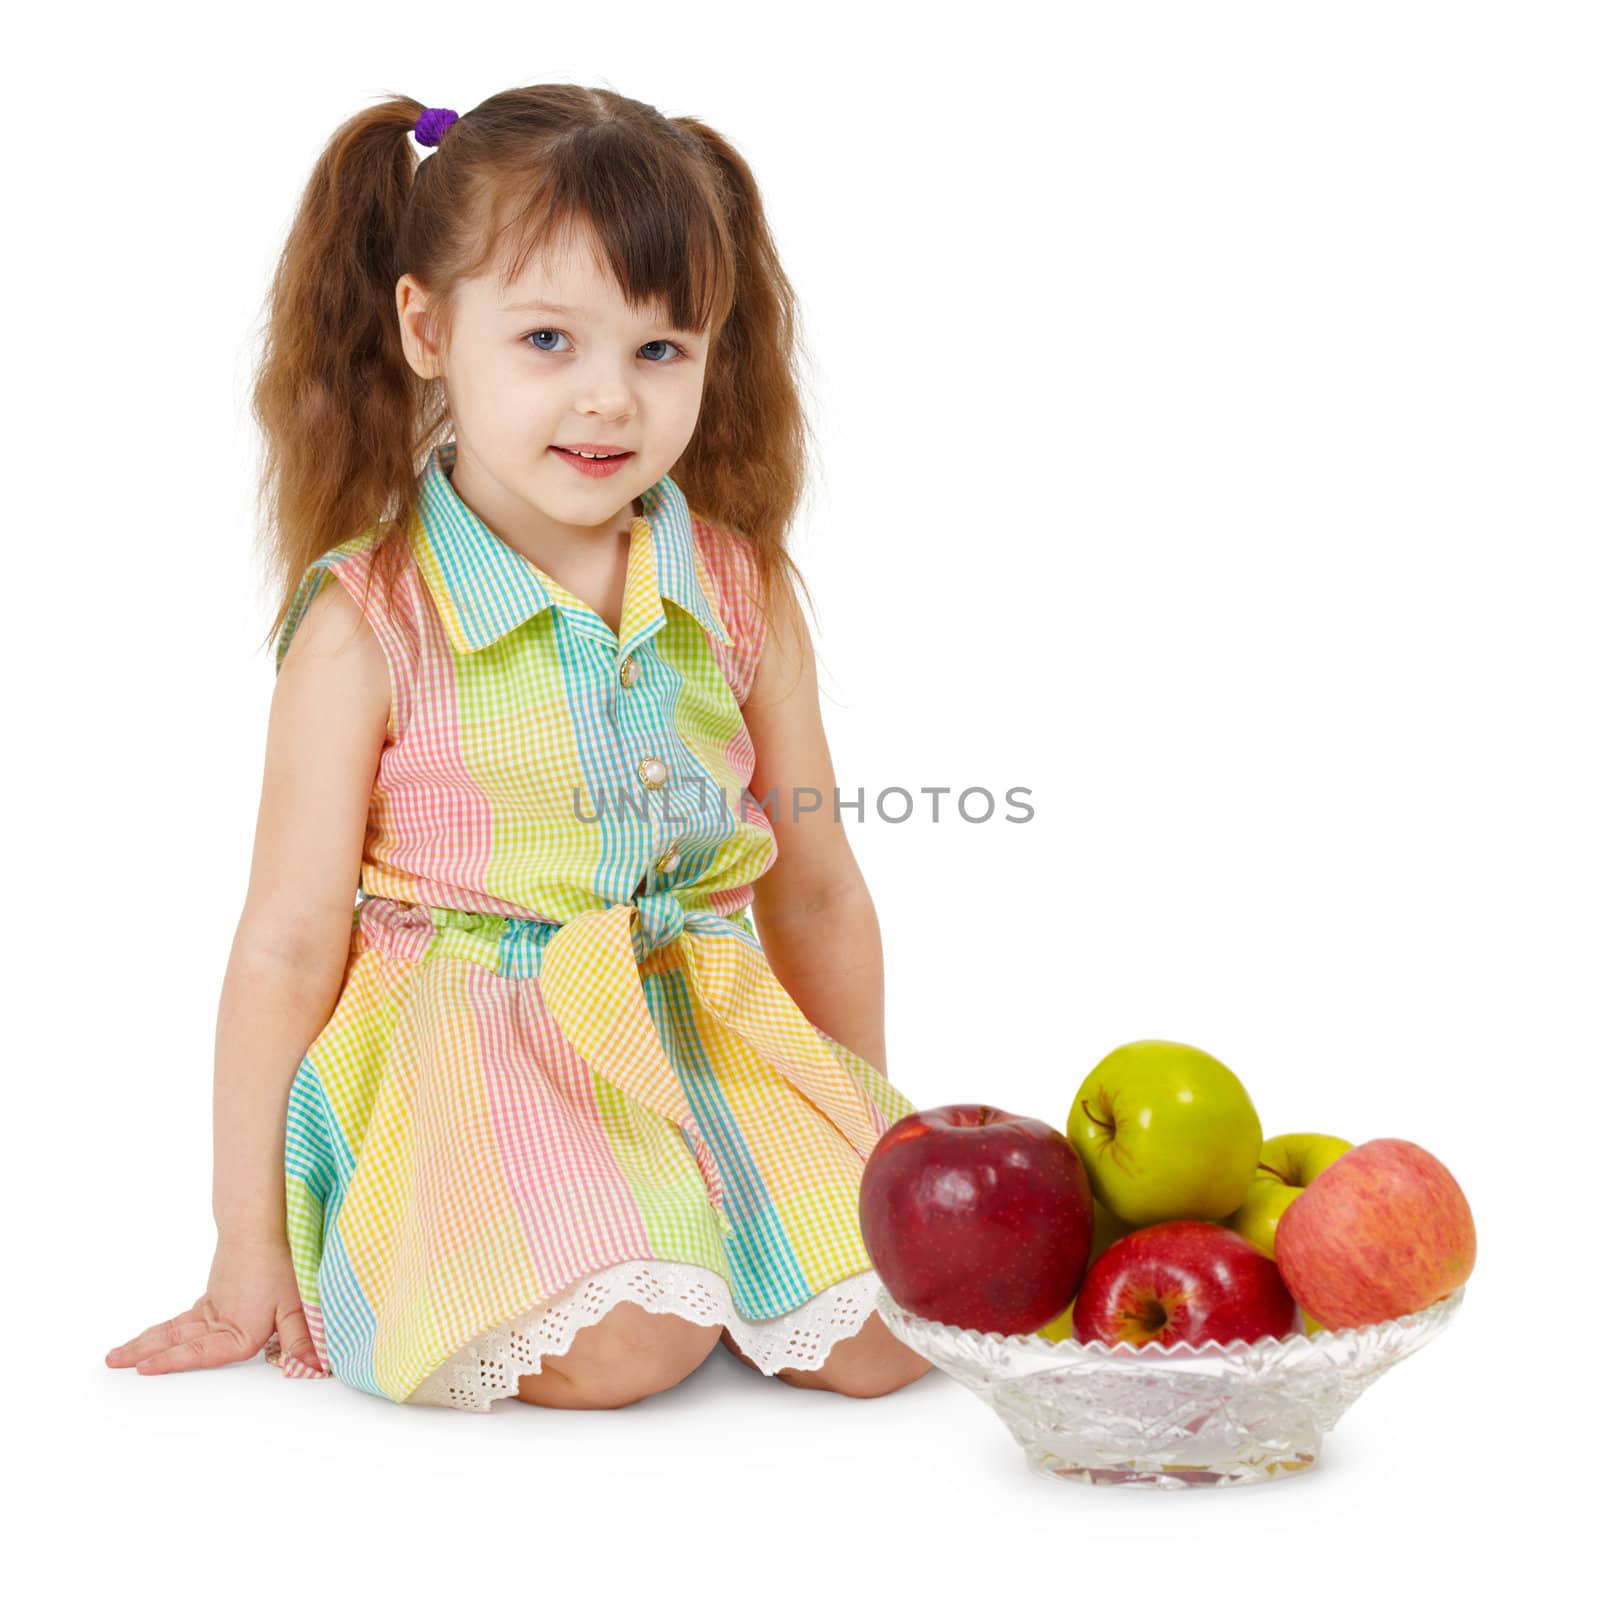 Little girl and dish filled with apples by pzaxe